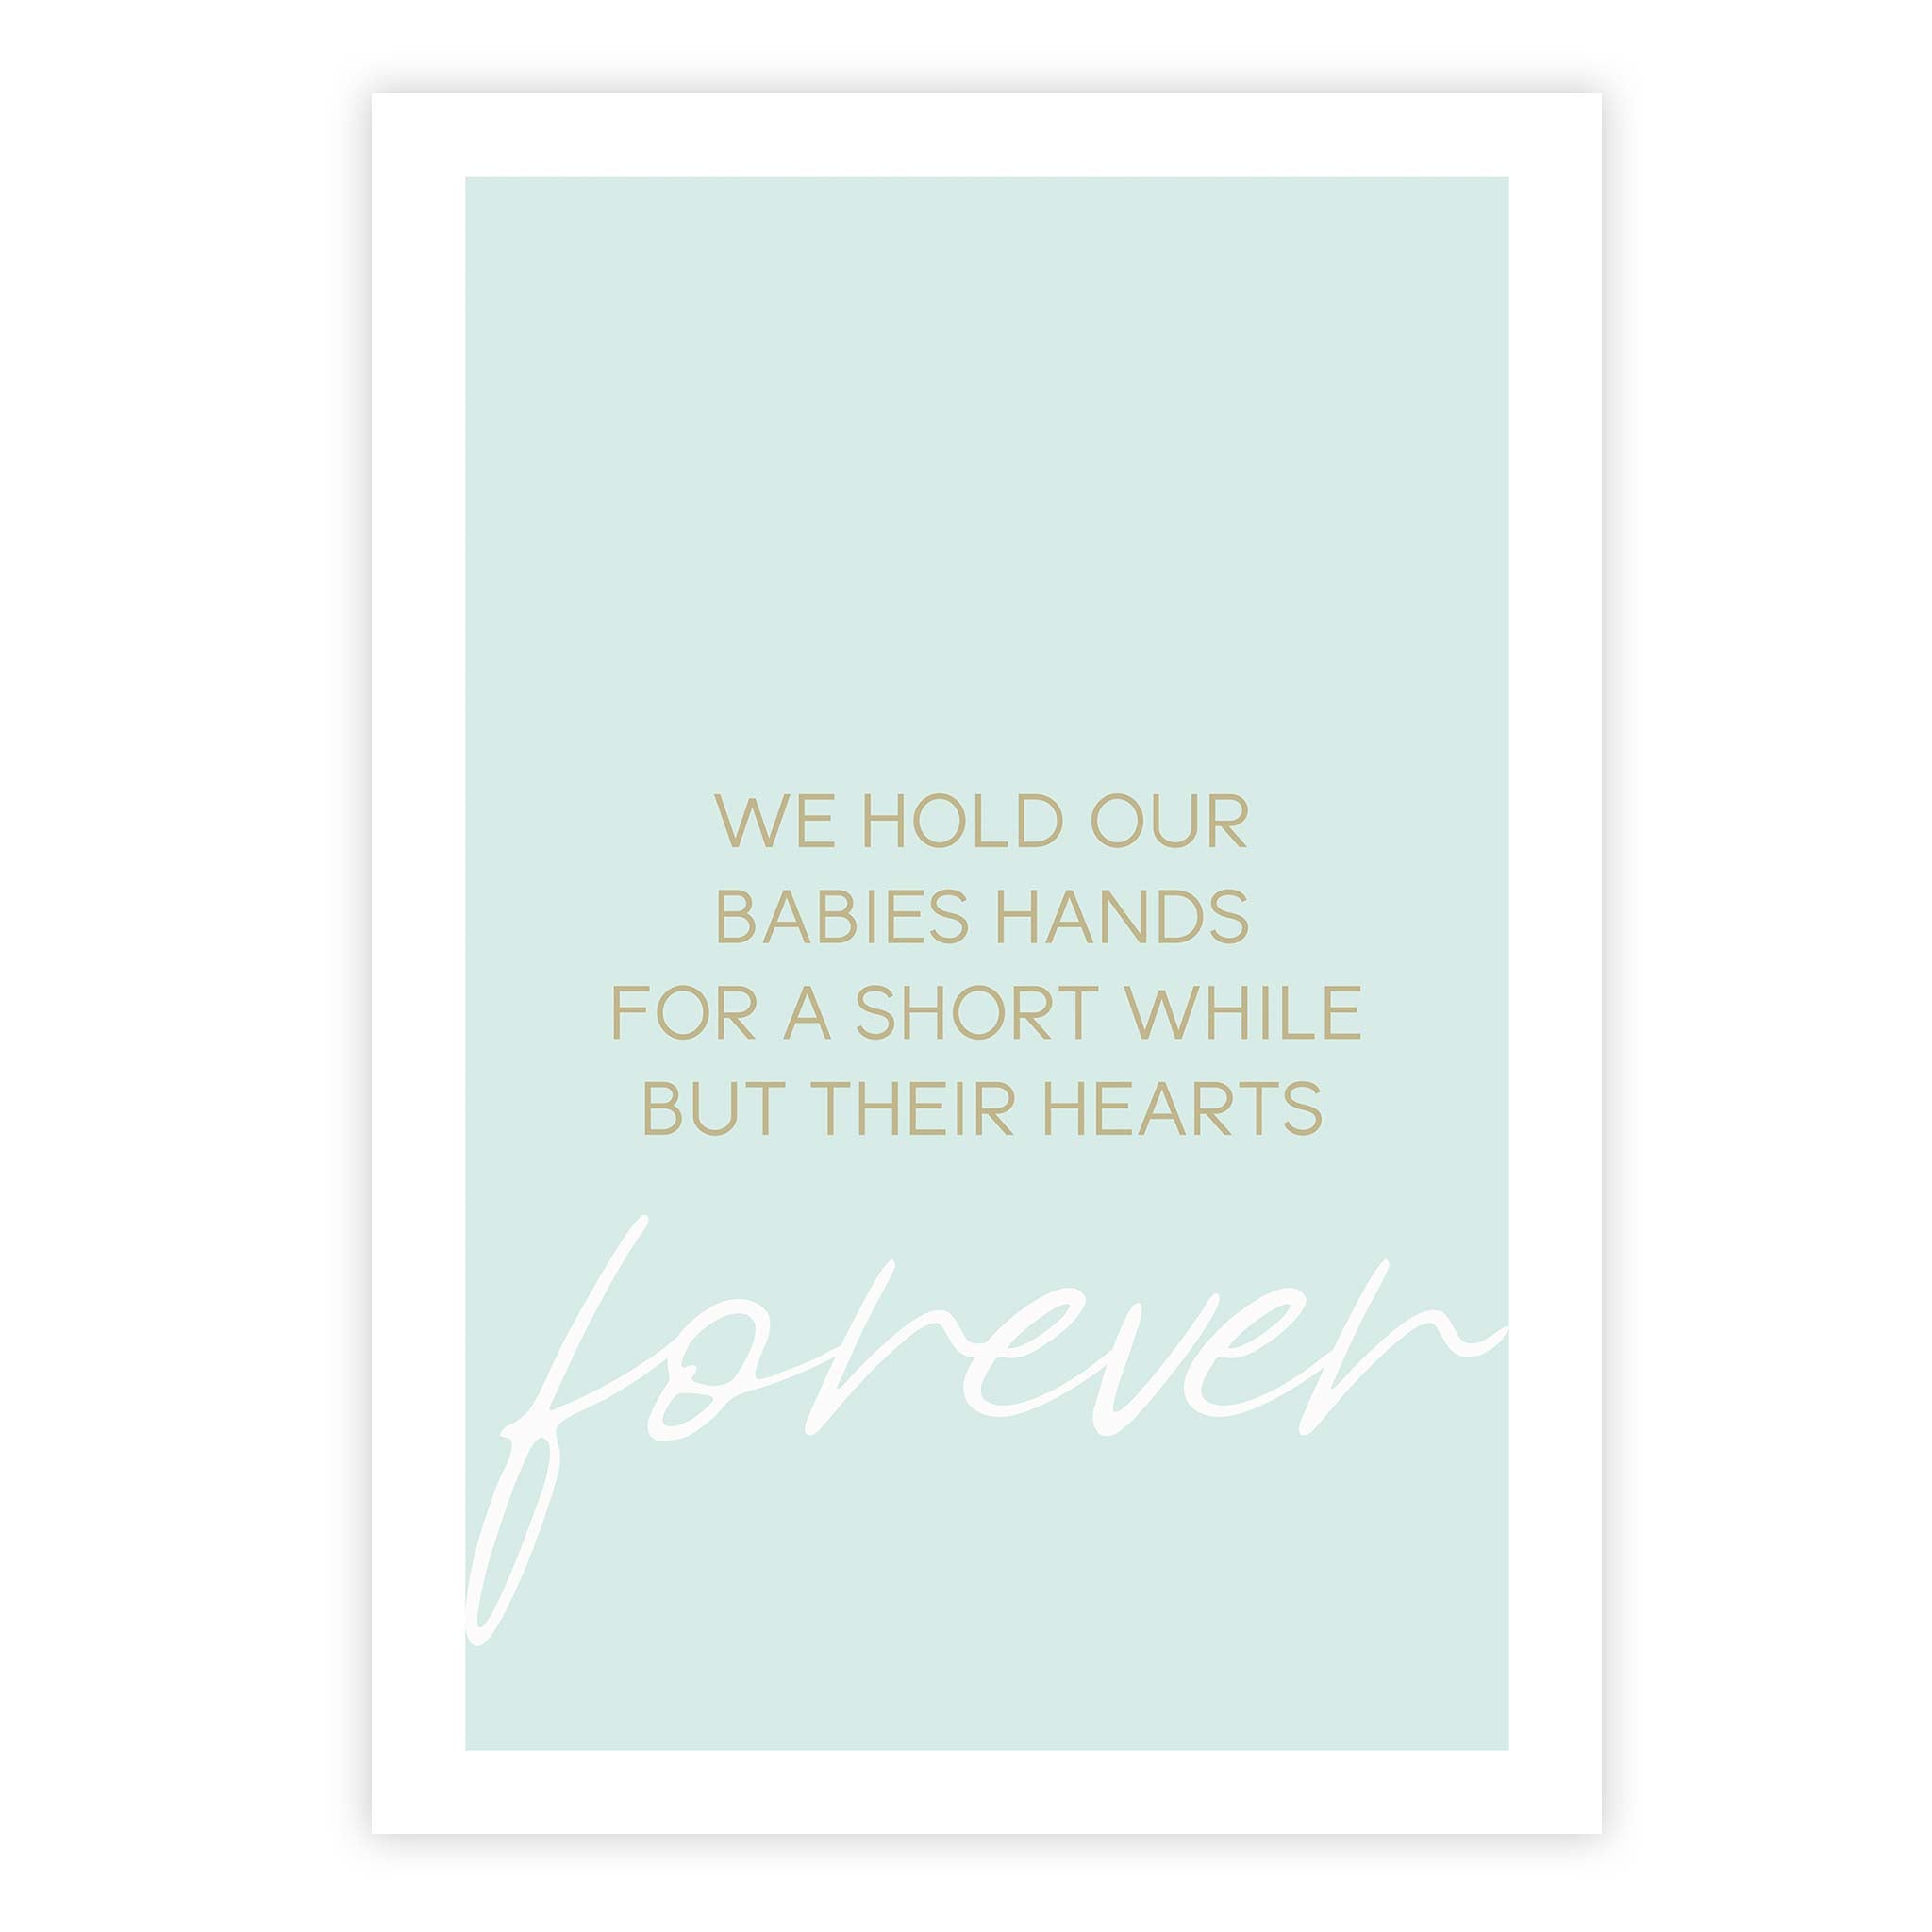 We hold our babies hands for a short while but their hearts forever